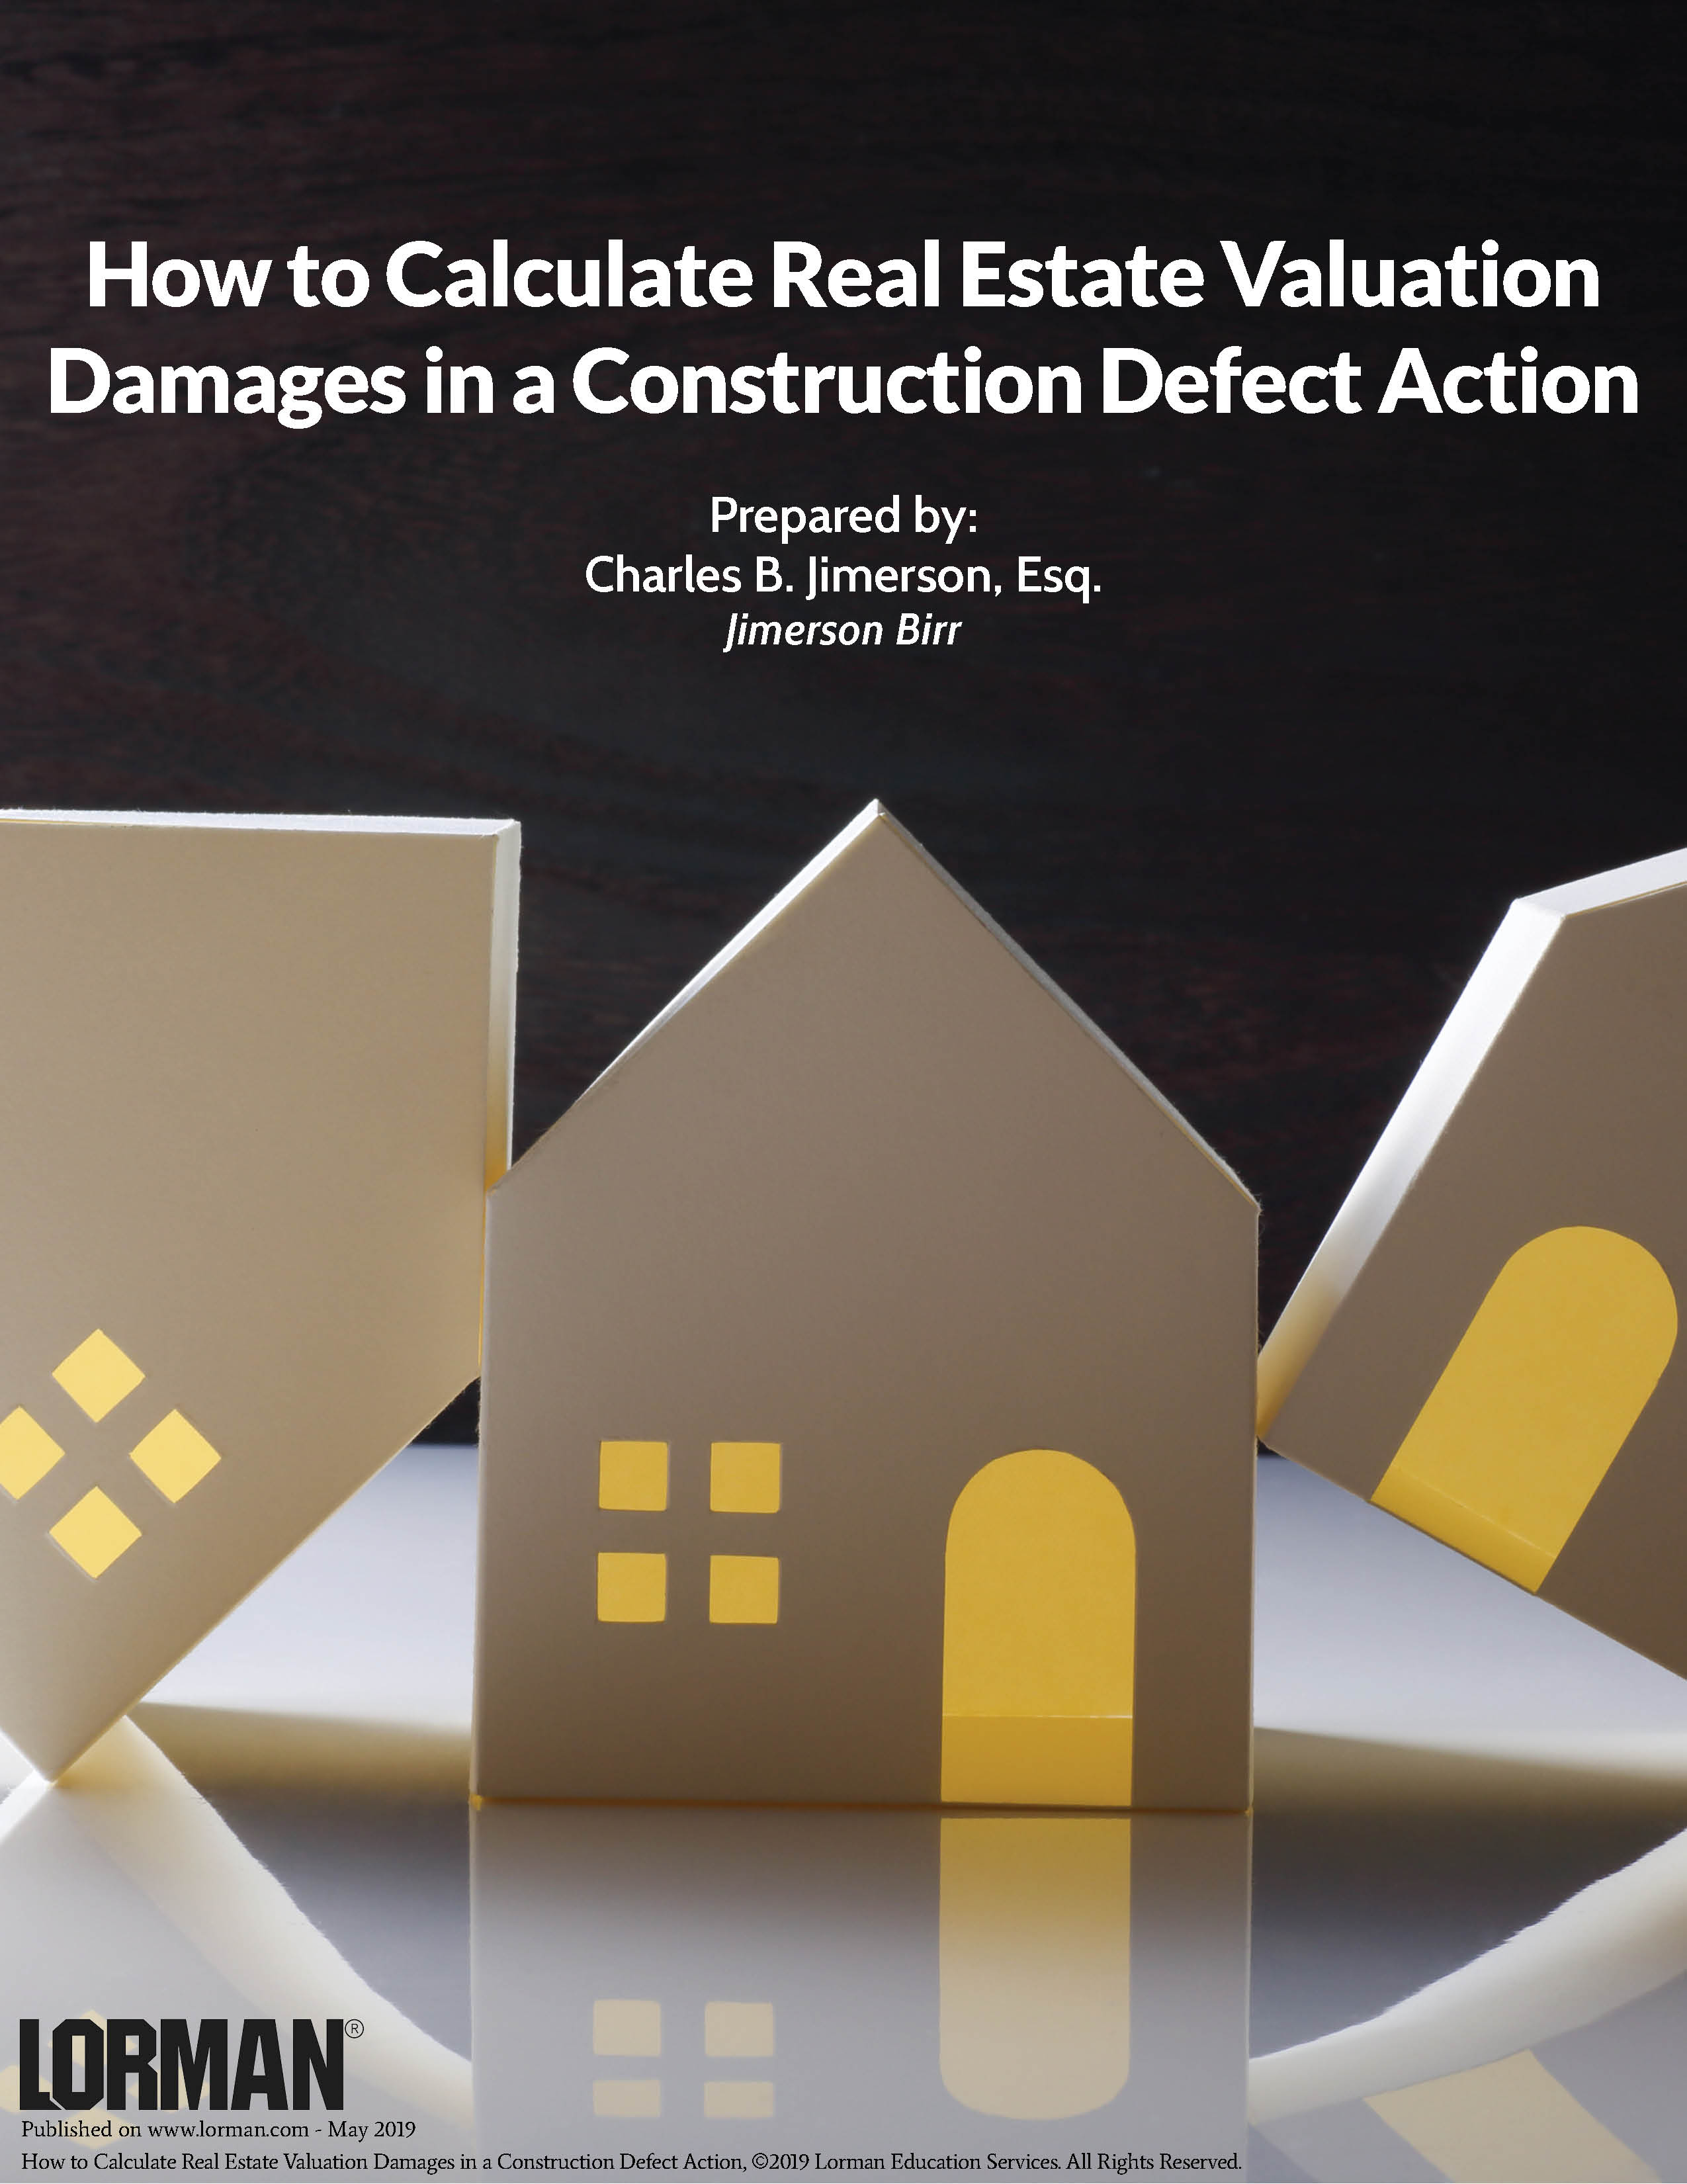 How to Calculate Real Estate Valuation Damages in a Construction Defect Action